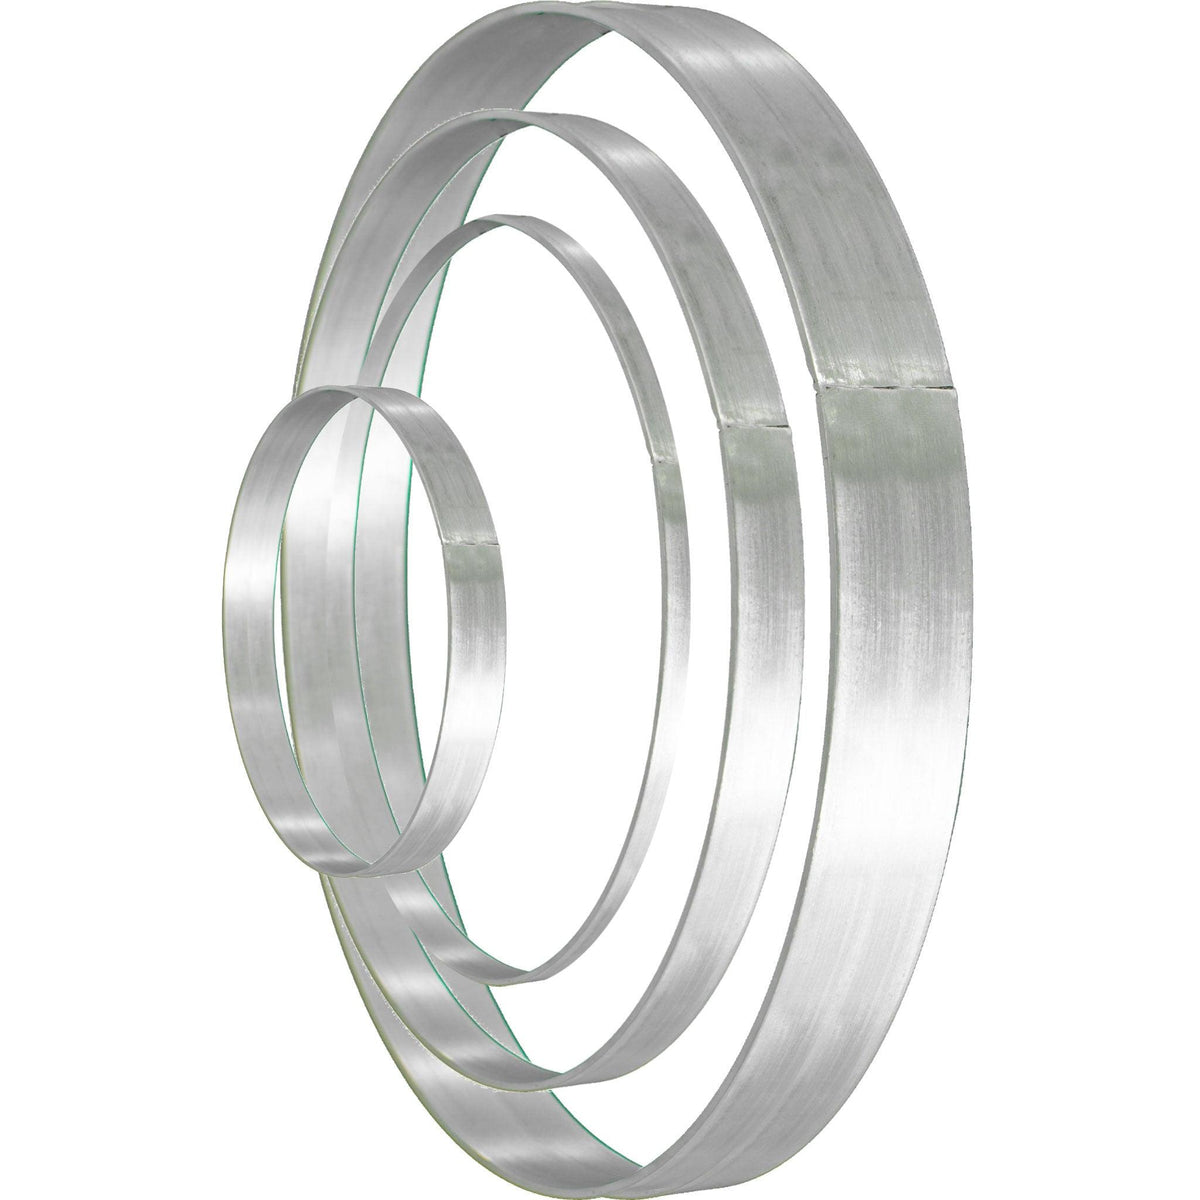 Multi size Aluminum Metal Alloy Rings made by Lee Display. Available for purchase at leedisplay.com